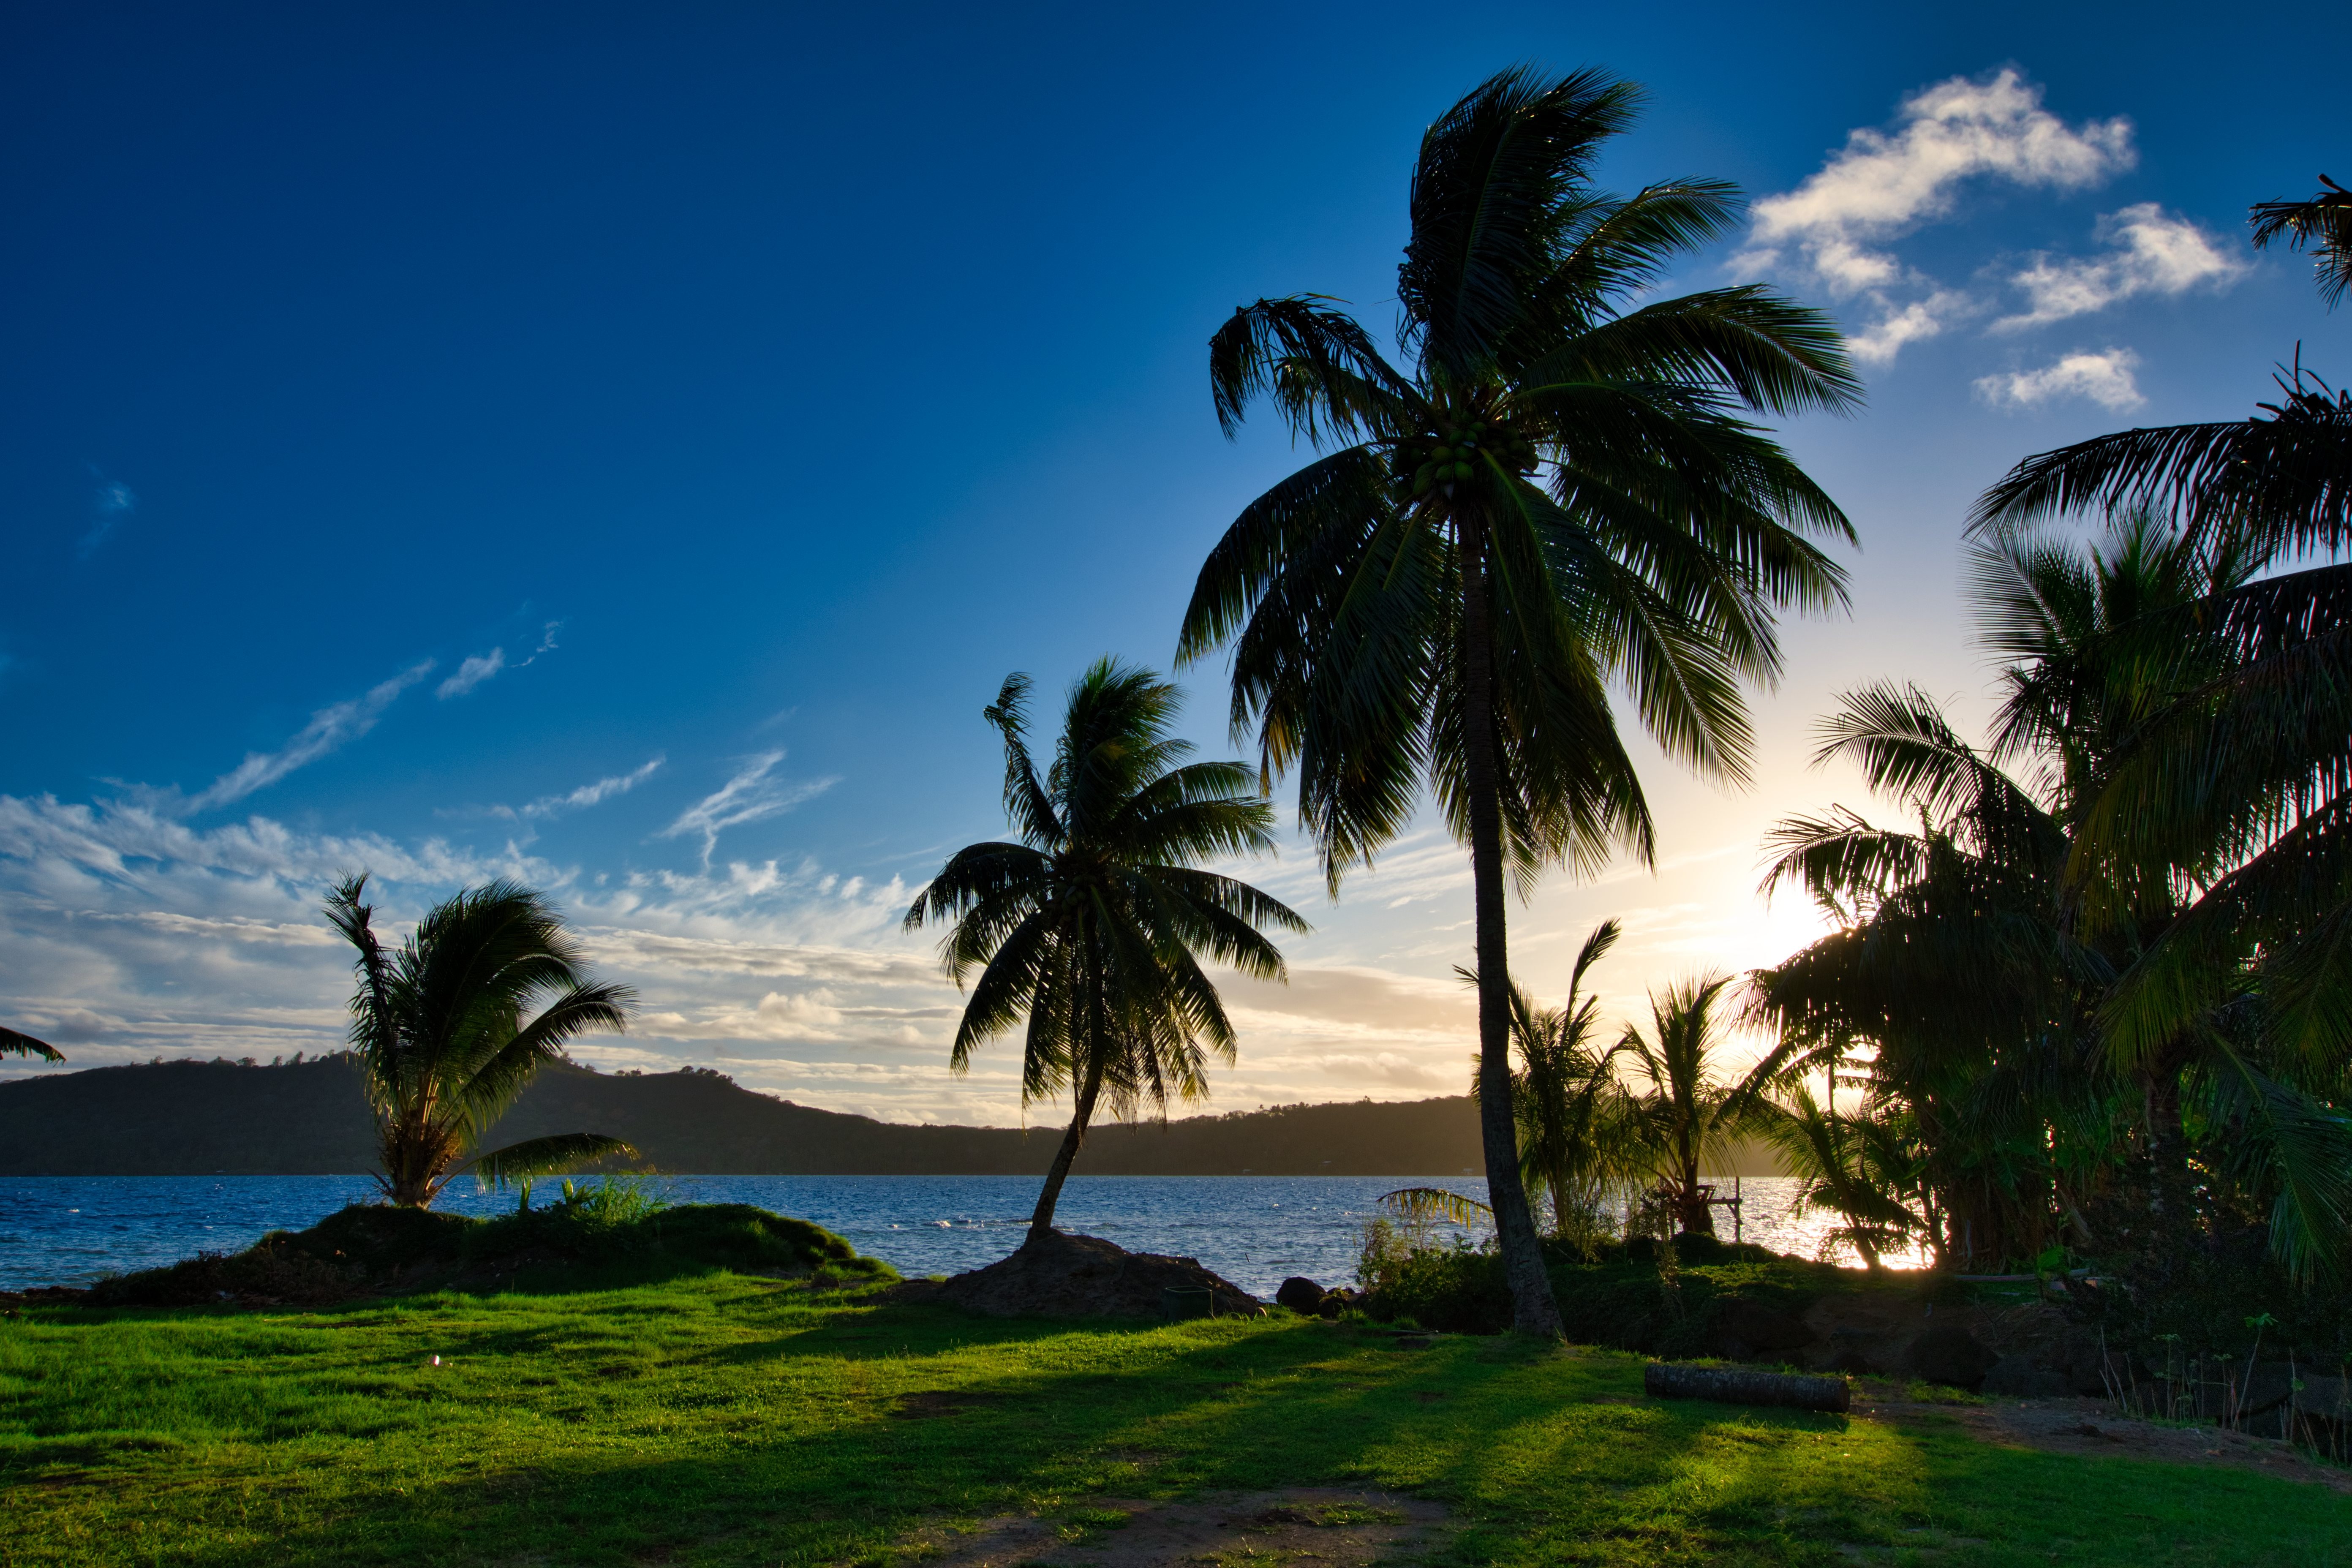 Don’t miss the excitement of road tripping around the Islands